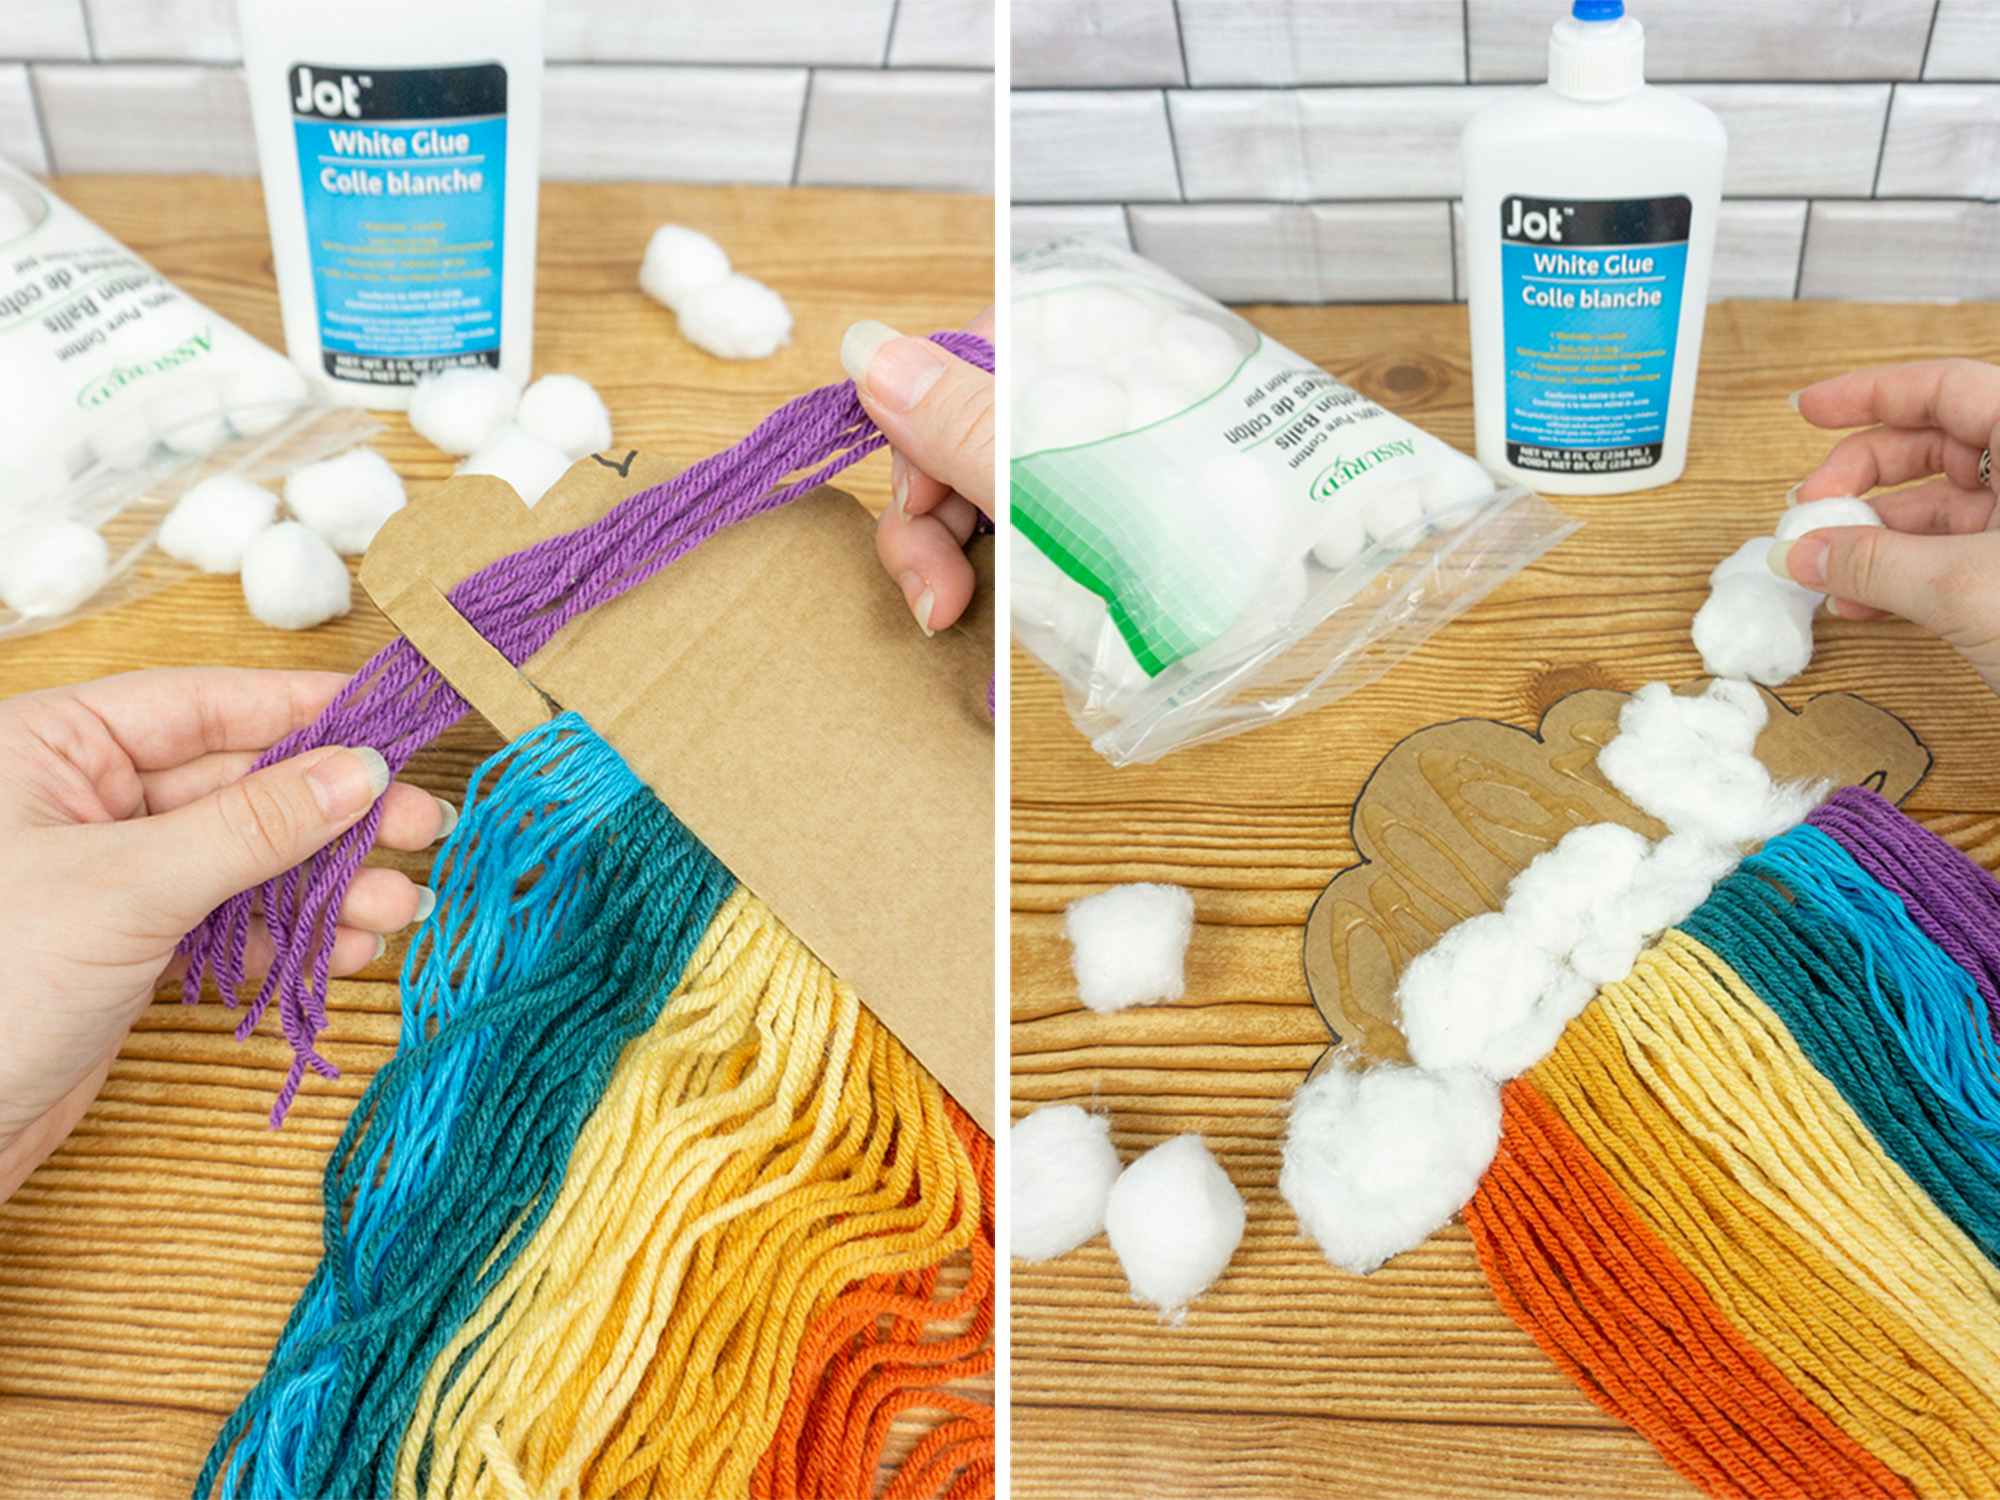 Someone pulling yarn through a hole in a cardboard cloud to make the purple stripe of a rainbow, and gluing cotton balls onto the cardboard for the cloud